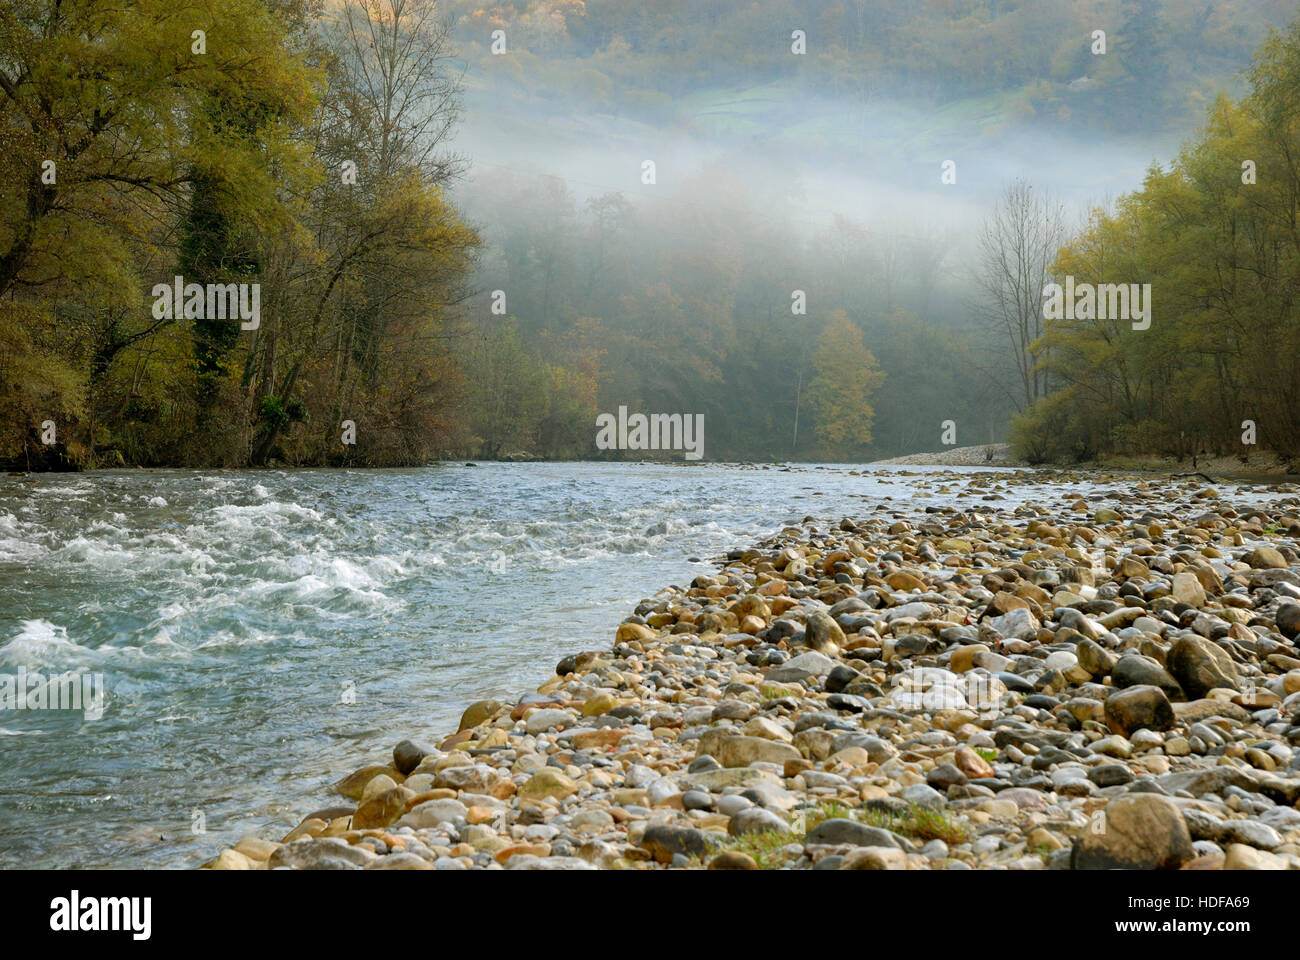 River passage through a cobbled area, in the middle of nature, with fog in the background Stock Photo